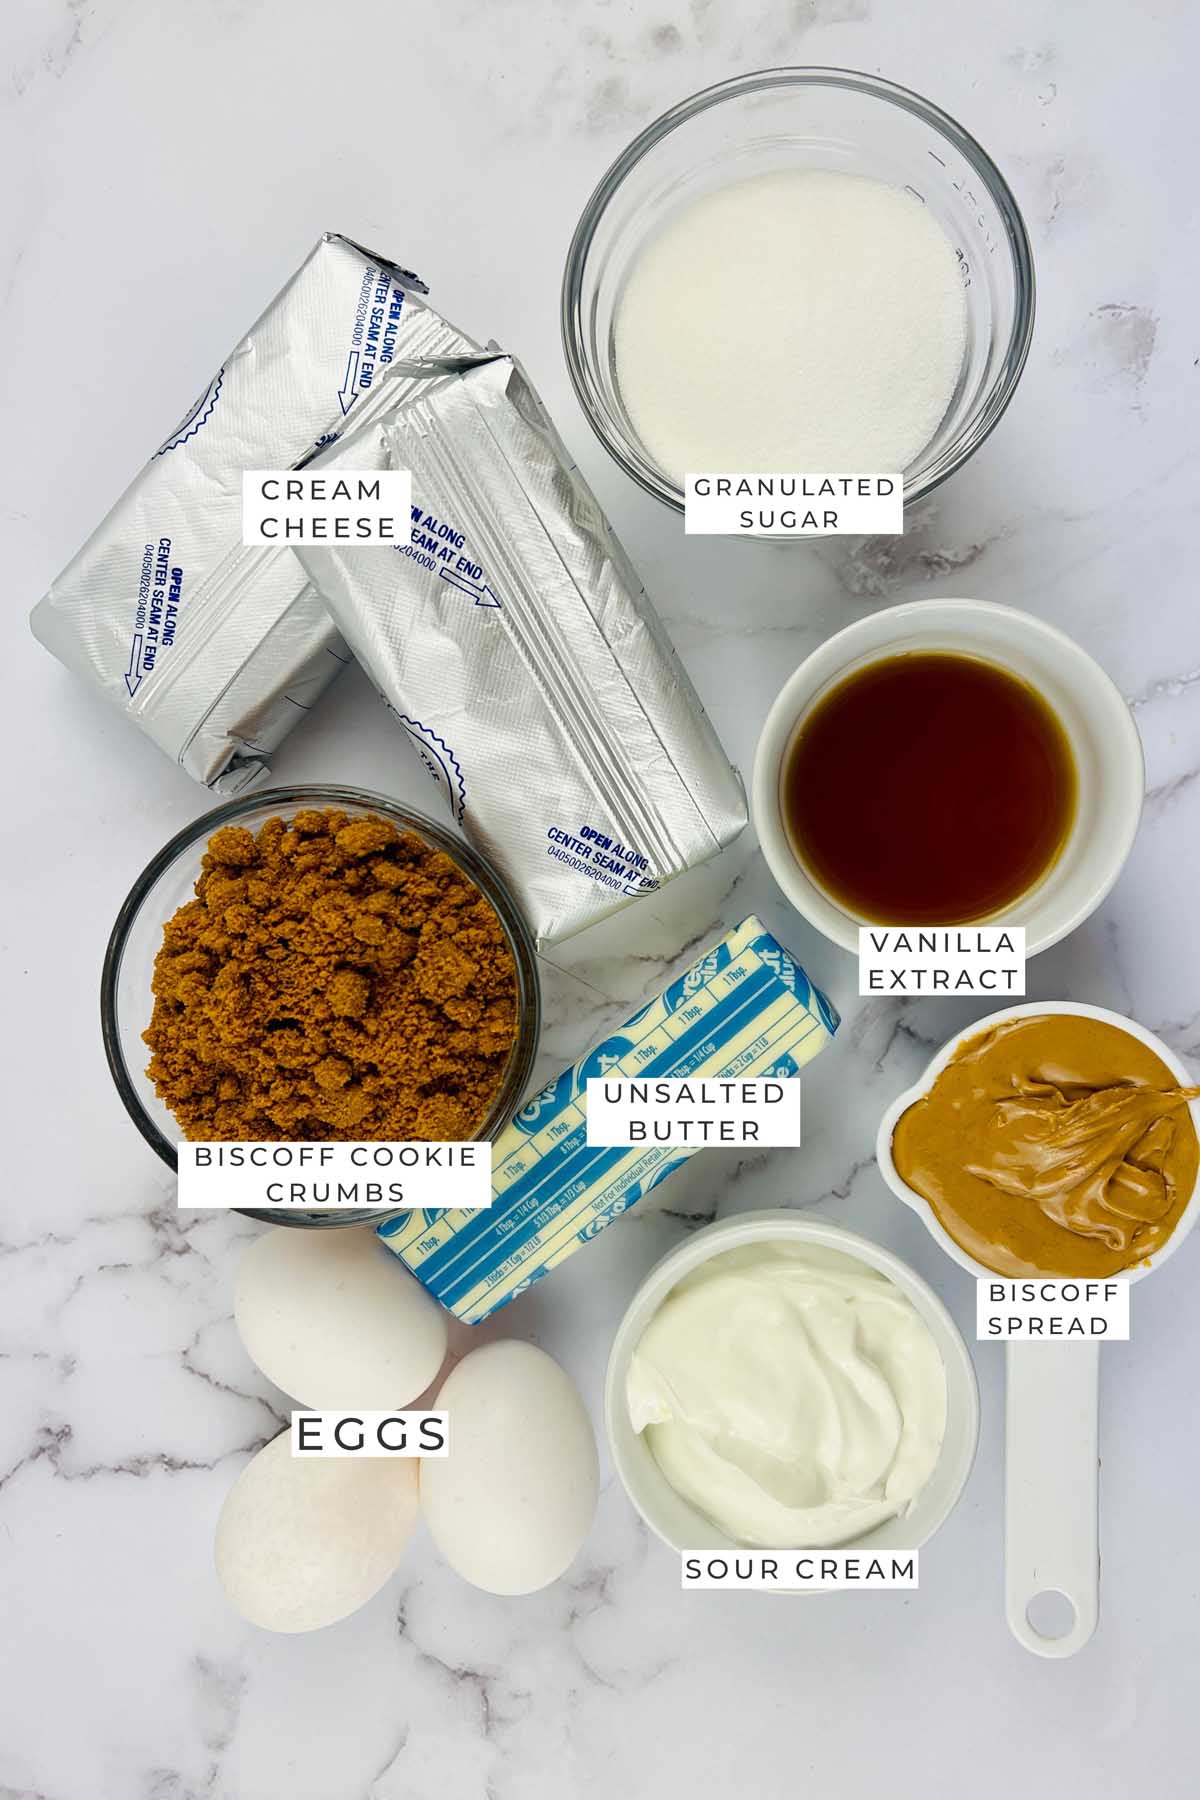 Labeled ingredients for the Biscoff bars.